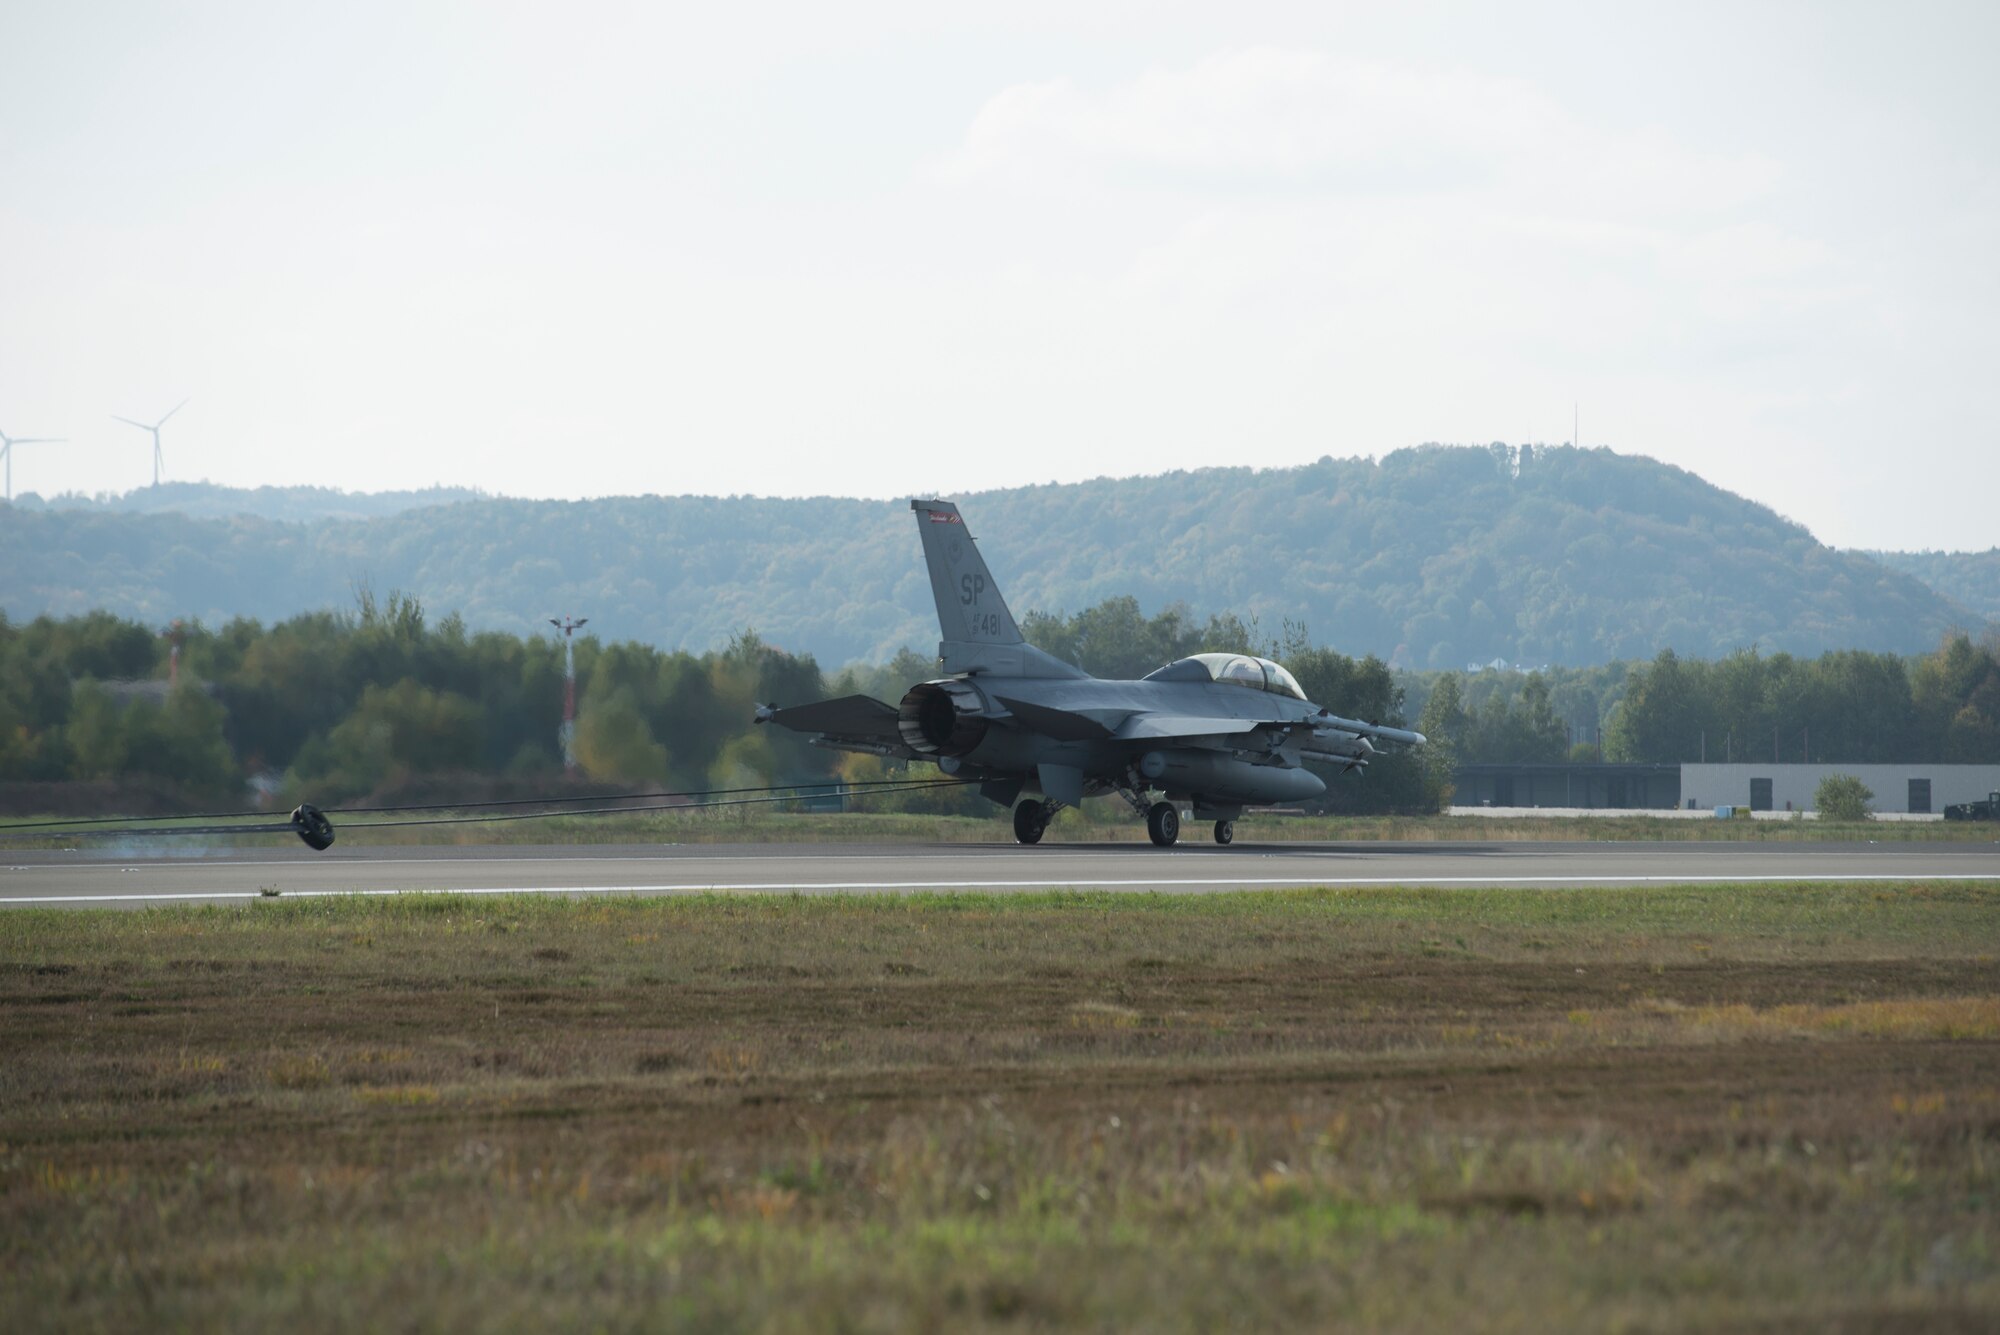 An U.S. Air Force F-16 Fighting Falcon assigned to Spangdahlem Air Base, Germany rests after hooking onto the aircraft arresting system at Ramstein Air Base, Germany, Oct. 28, 2019. Ramstein AB is annually certified on aircraft arresting systems in the event other bases may need to use them.